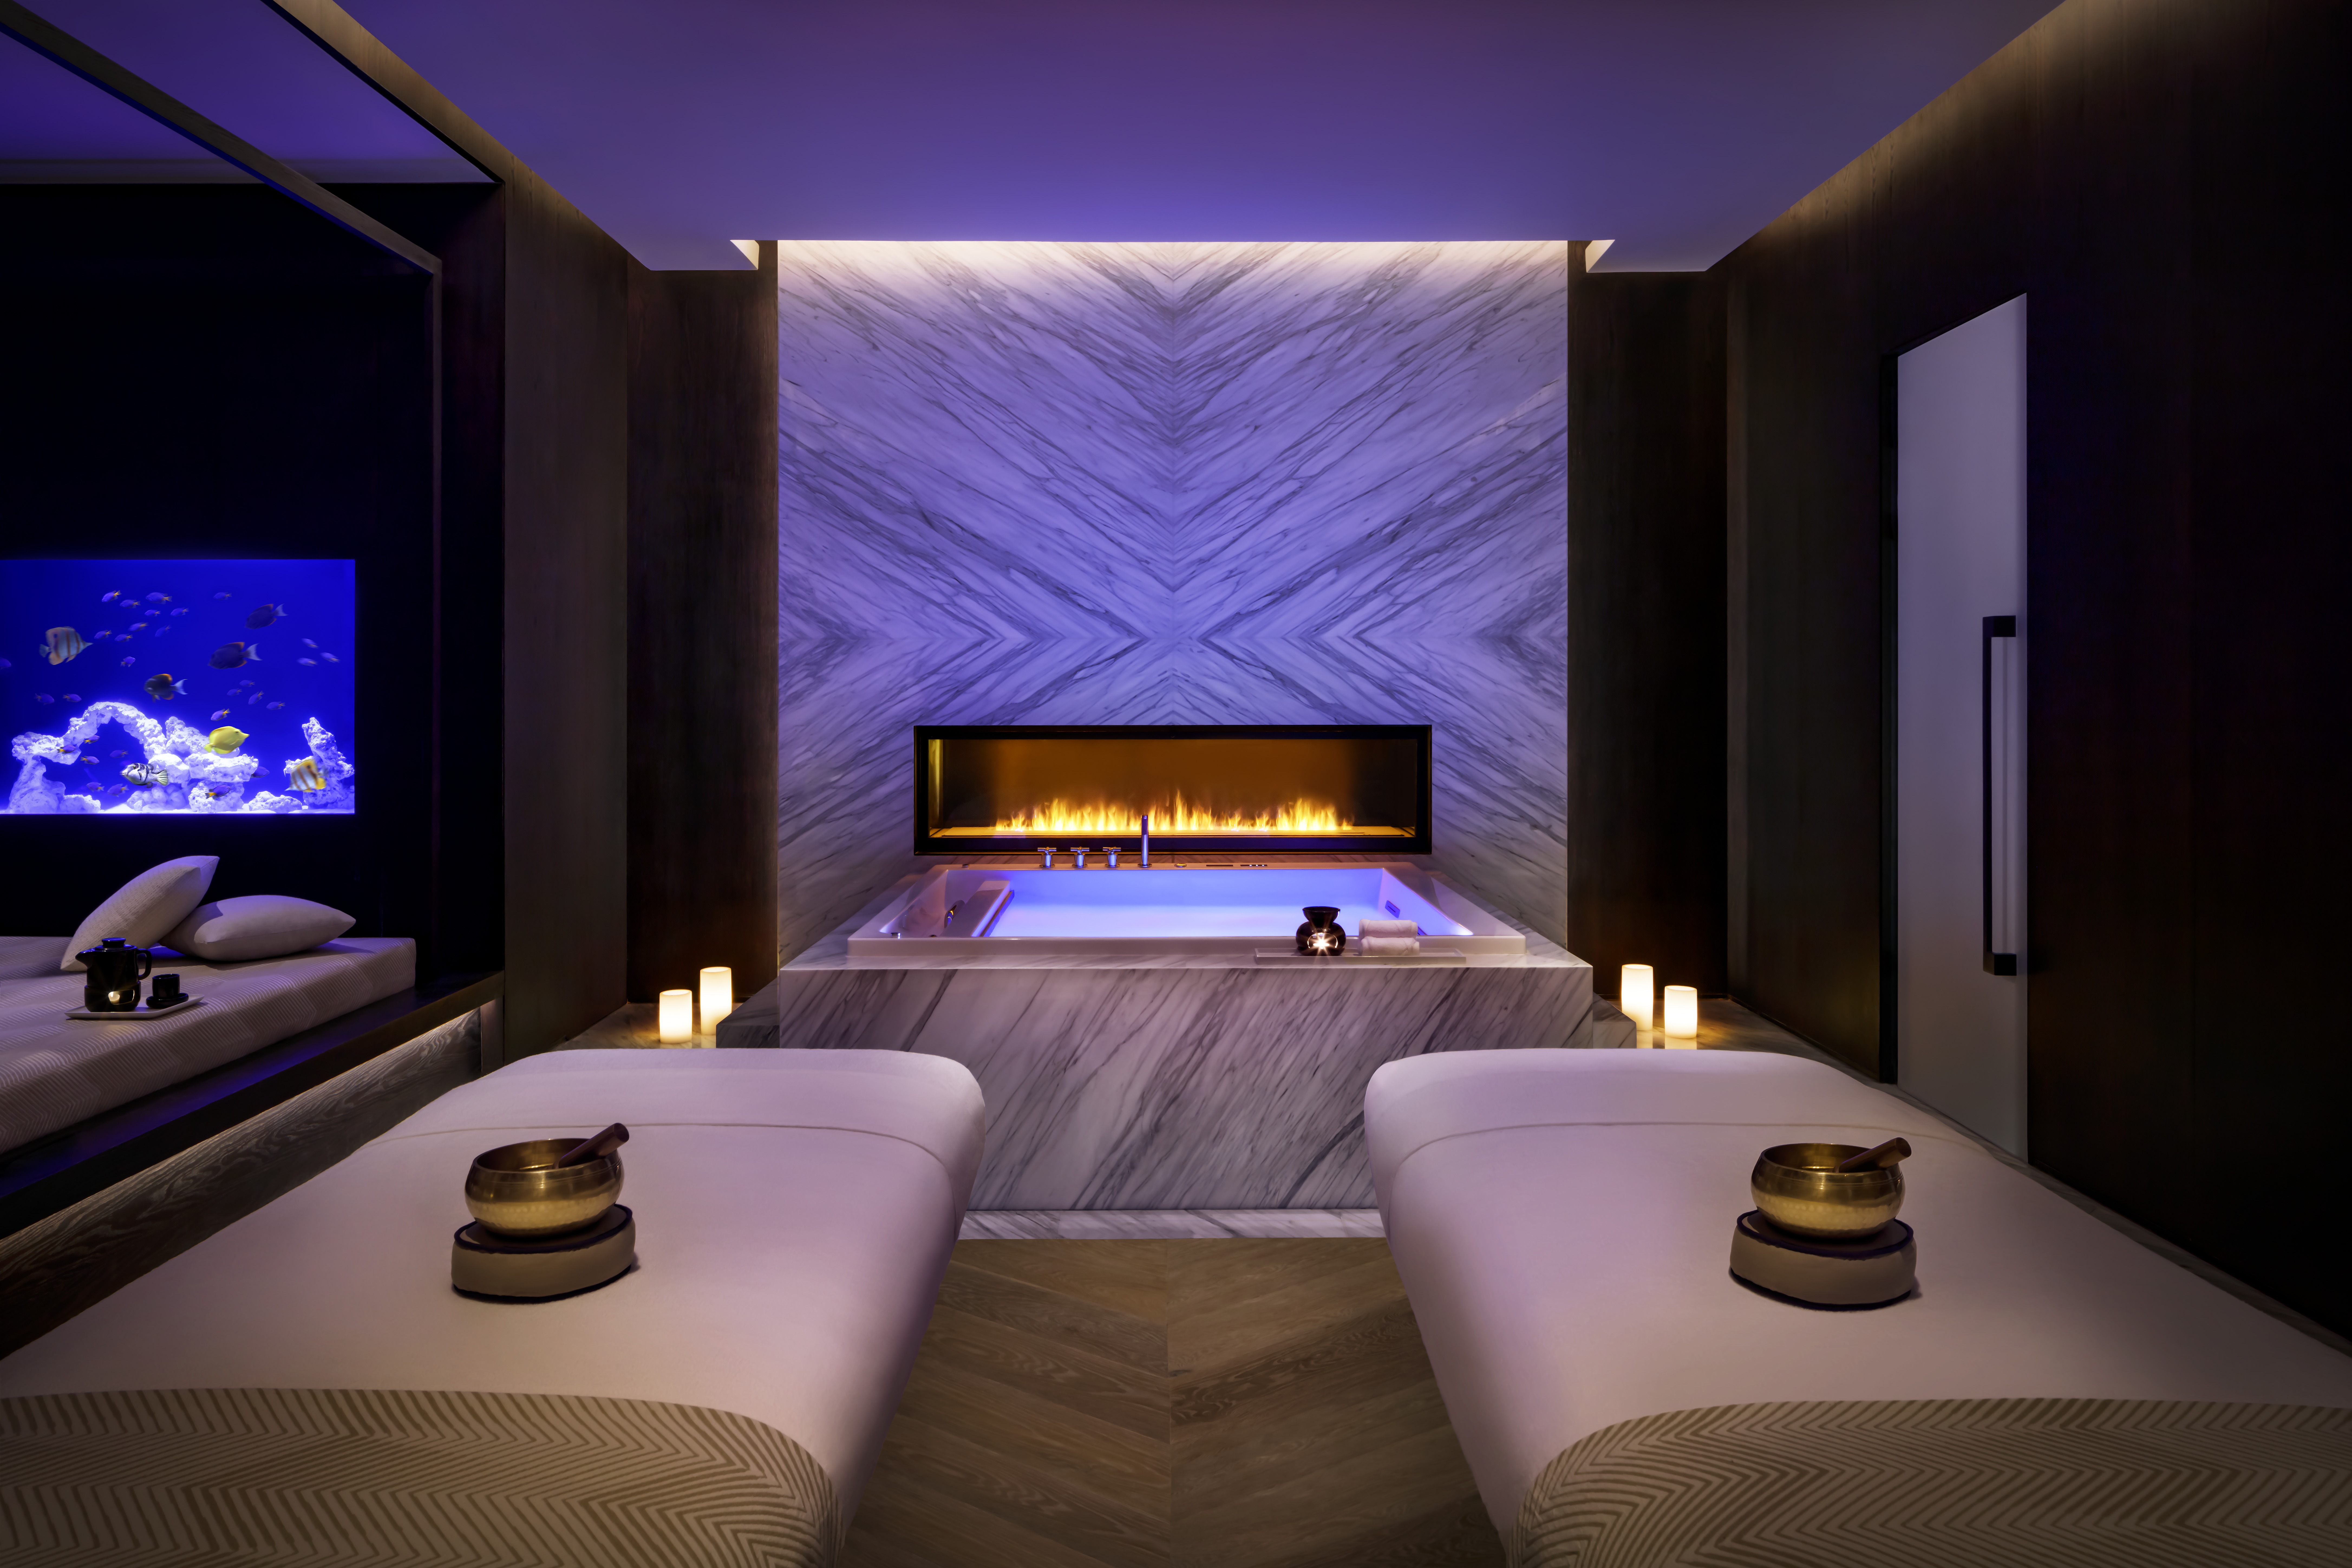 Embracing the Ahhhh: 7 Spa Tips to Have the Perfect Spa Day - Faces Spa